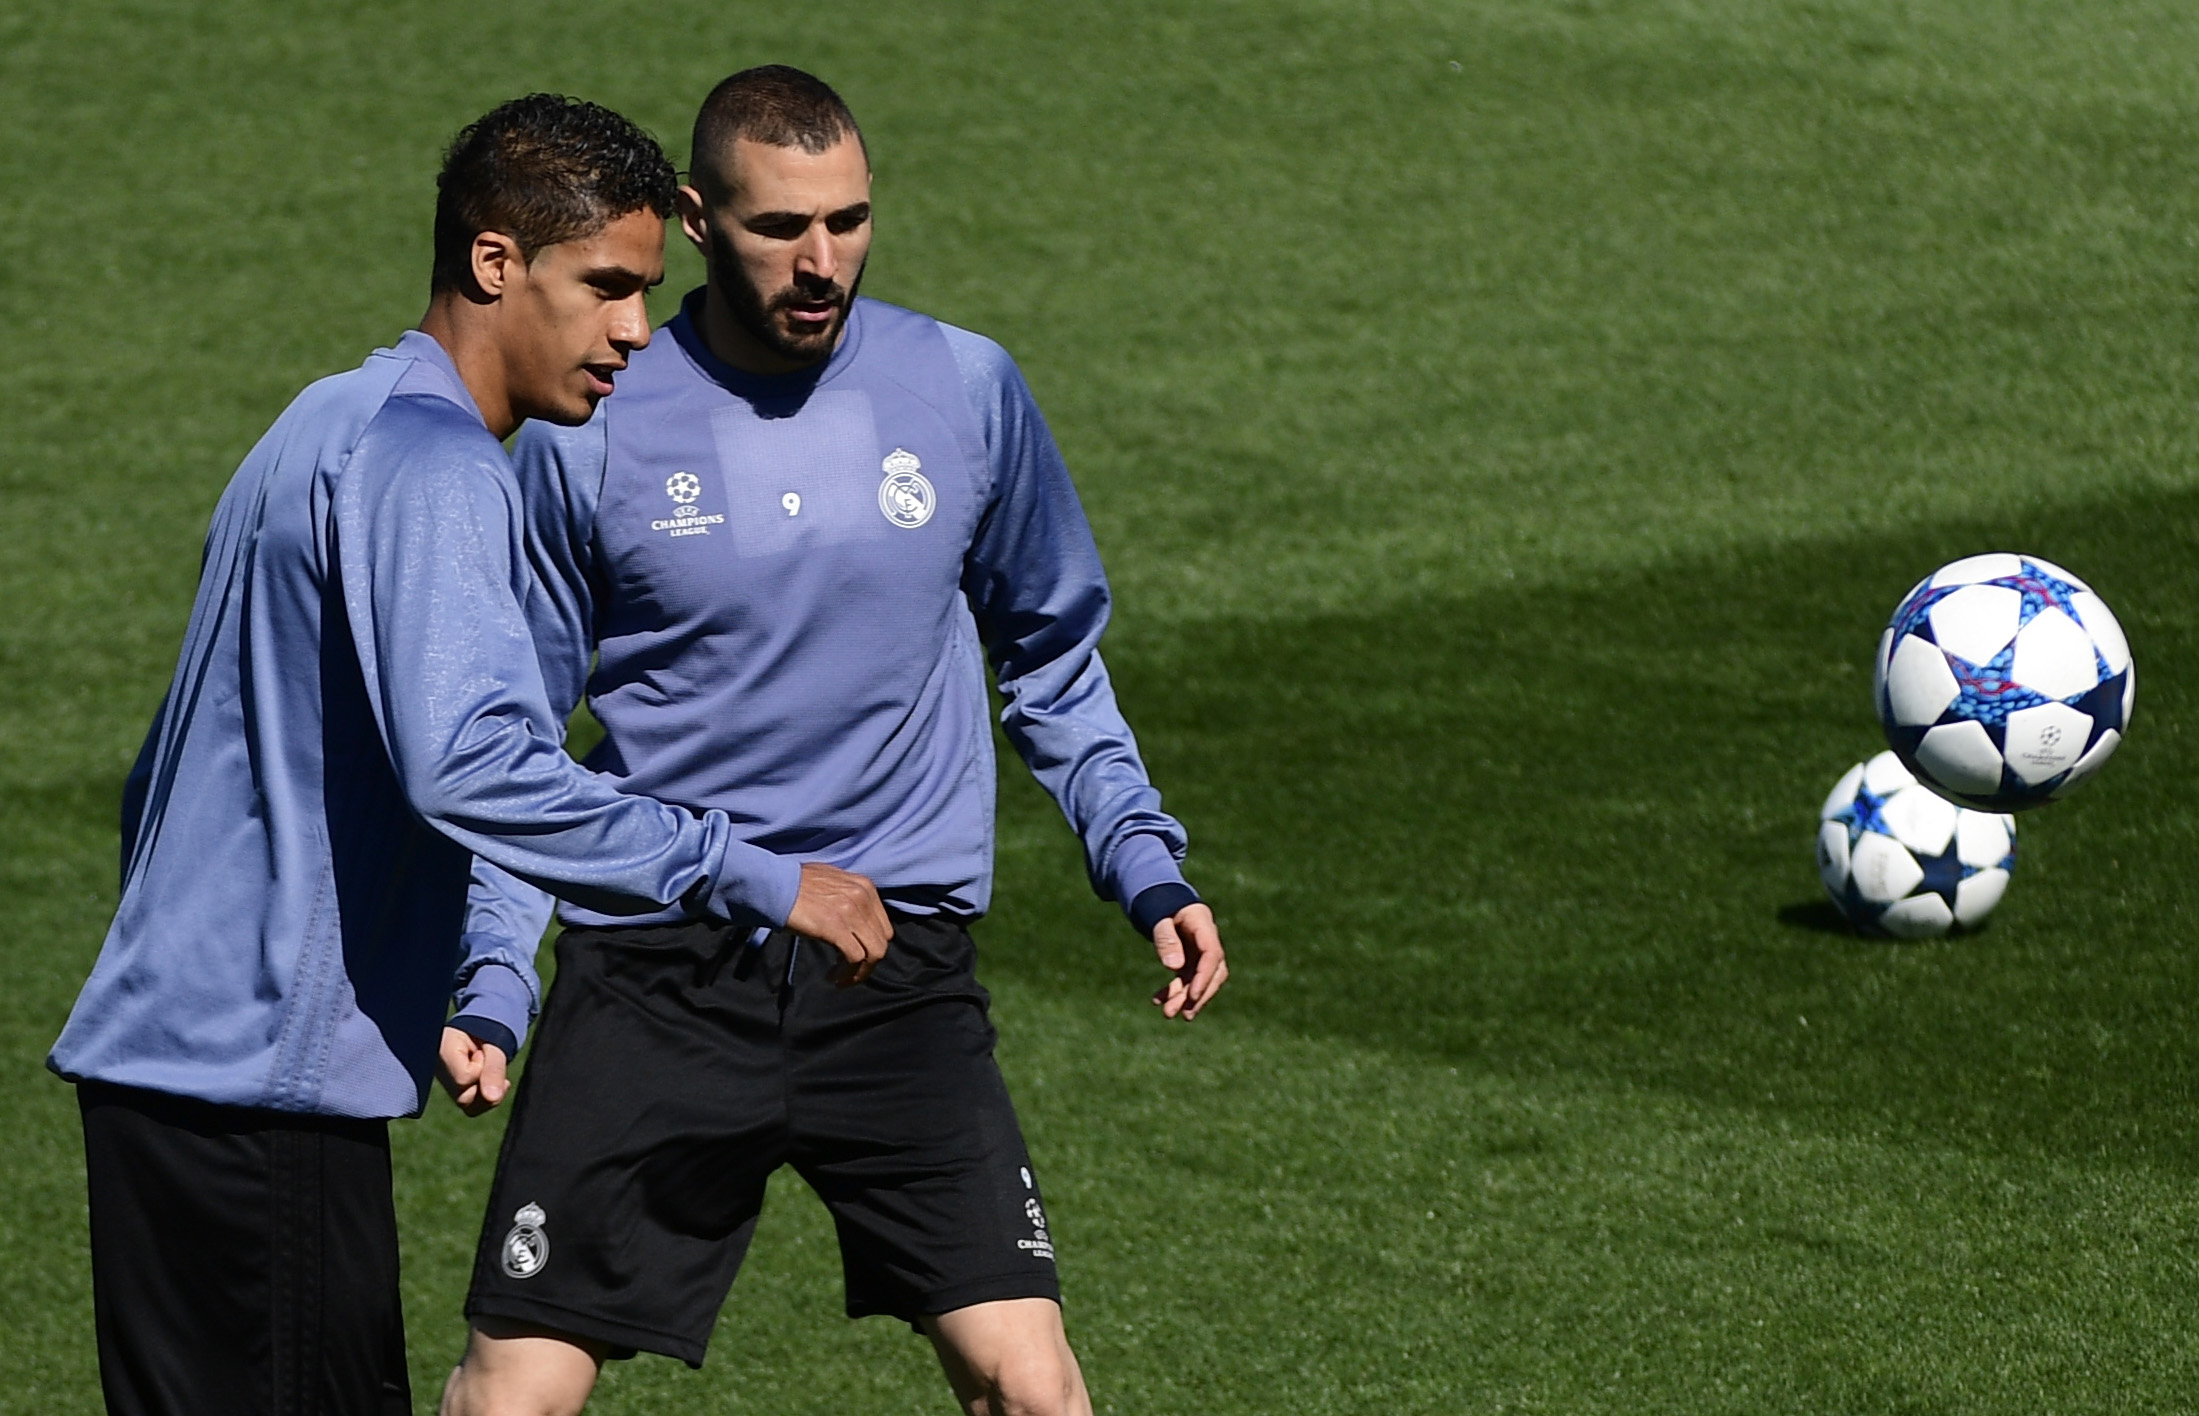 Real Madrid's French defender Raphael Varane (L) and Real Madrid's French forward Karim Benzema attend a training session at Valdebebas Sport City in Madrid on May 1, 2017 on the eve of their Champions' League semi-final first leg football match against Atletico de Madrid. / AFP PHOTO / PIERRE-PHILIPPE MARCOU        (Photo credit should read PIERRE-PHILIPPE MARCOU/AFP/Getty Images)